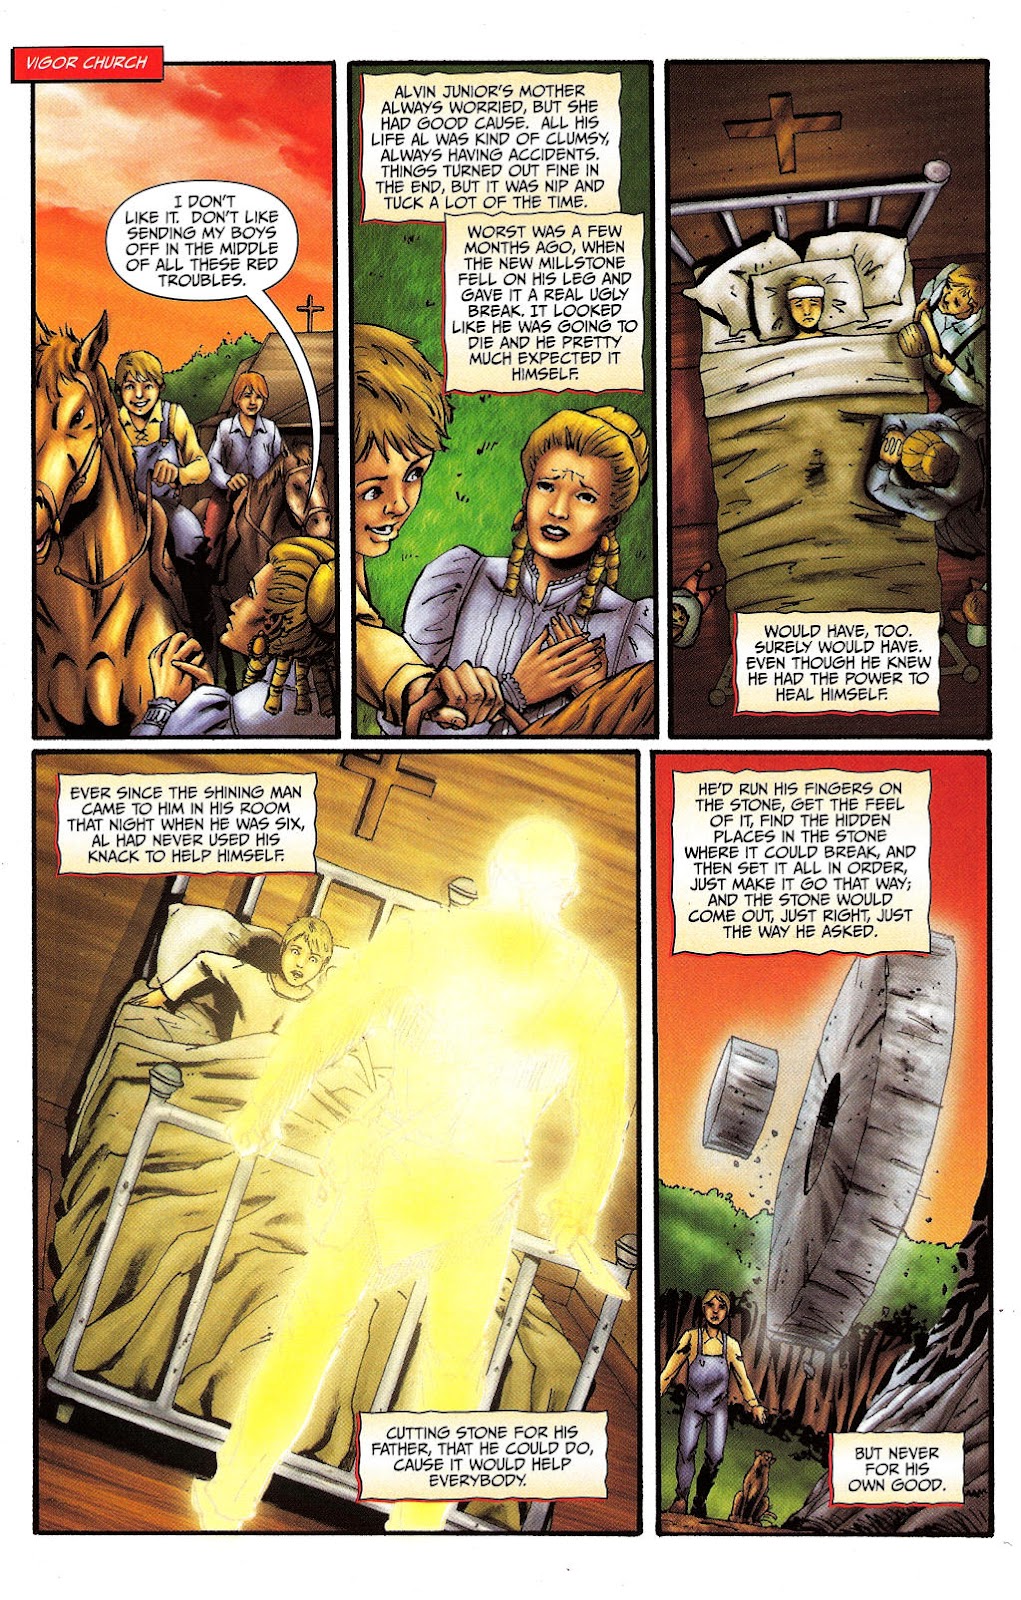 Red Prophet: The Tales of Alvin Maker issue 4 - Page 13